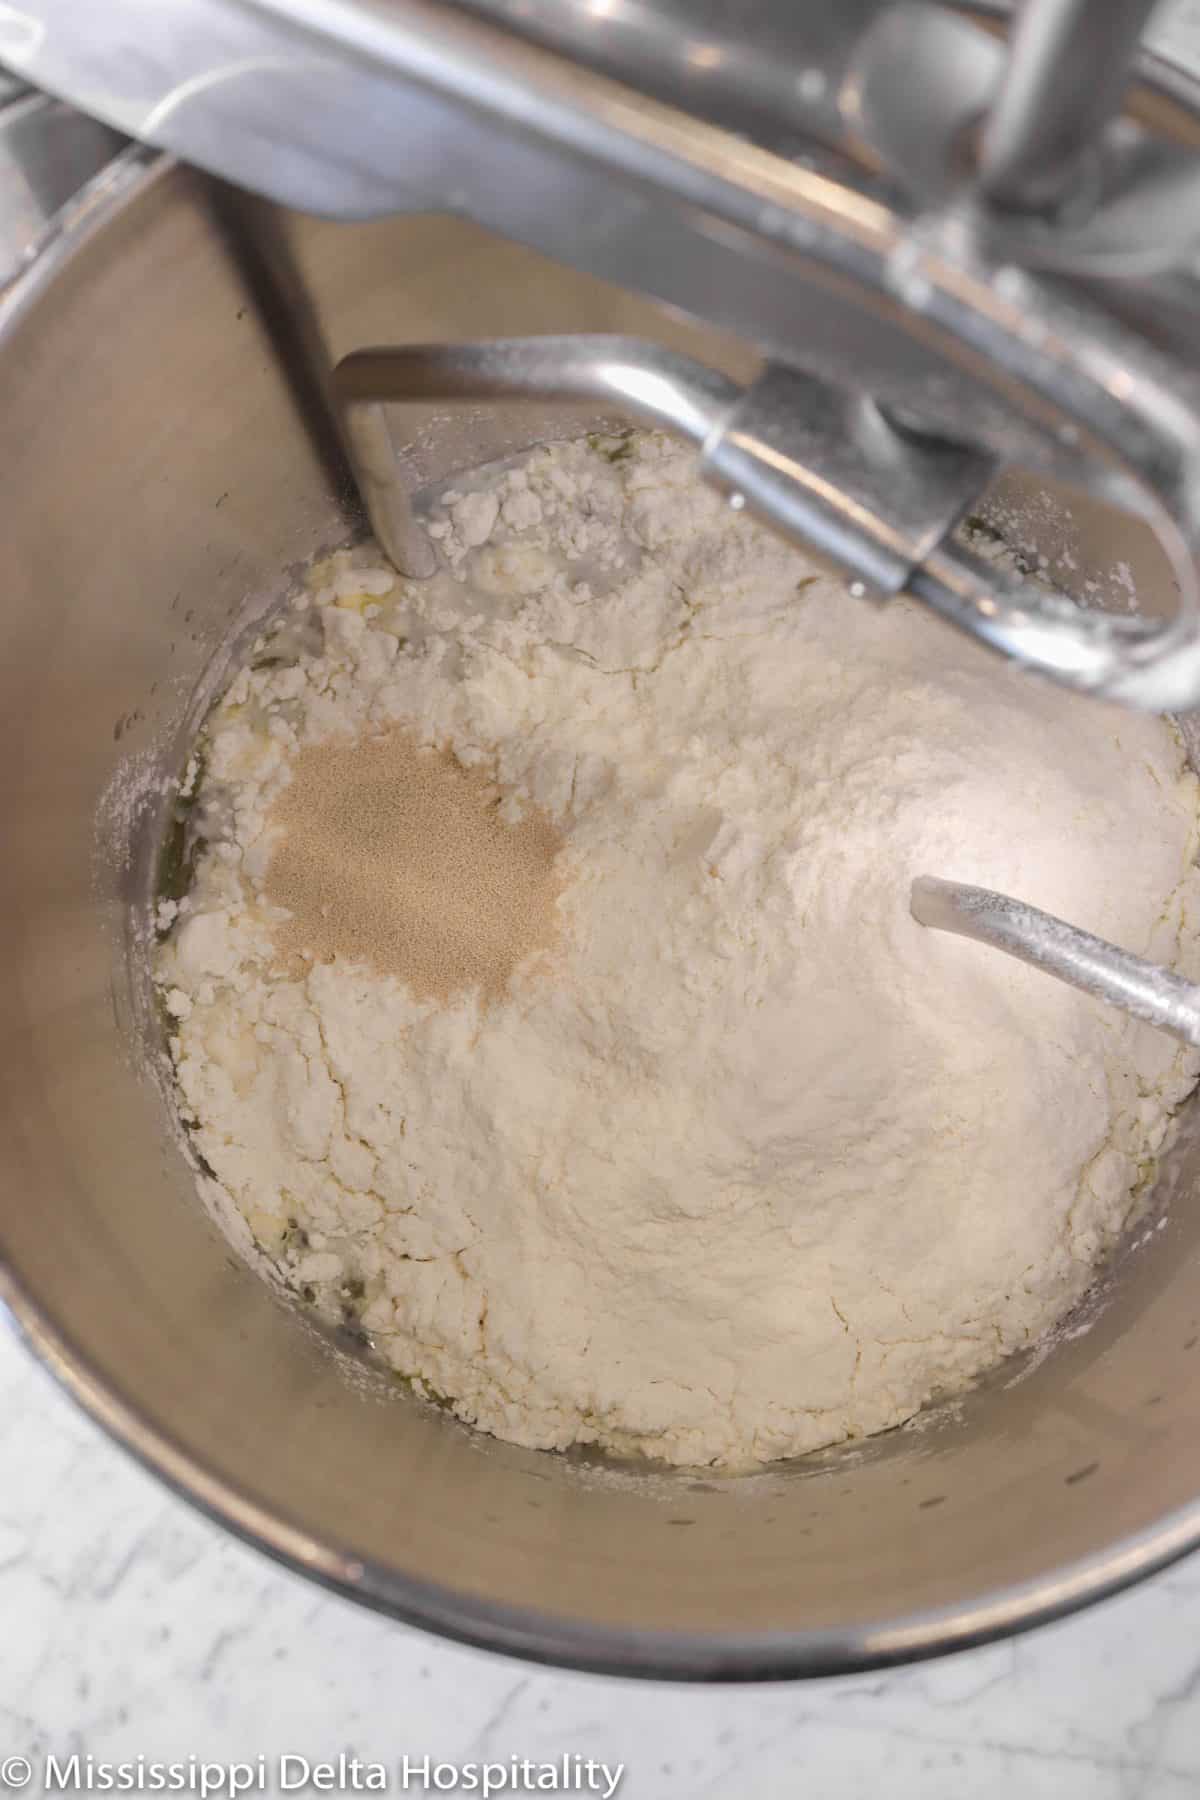 flour and yeast added to water and oil mixture